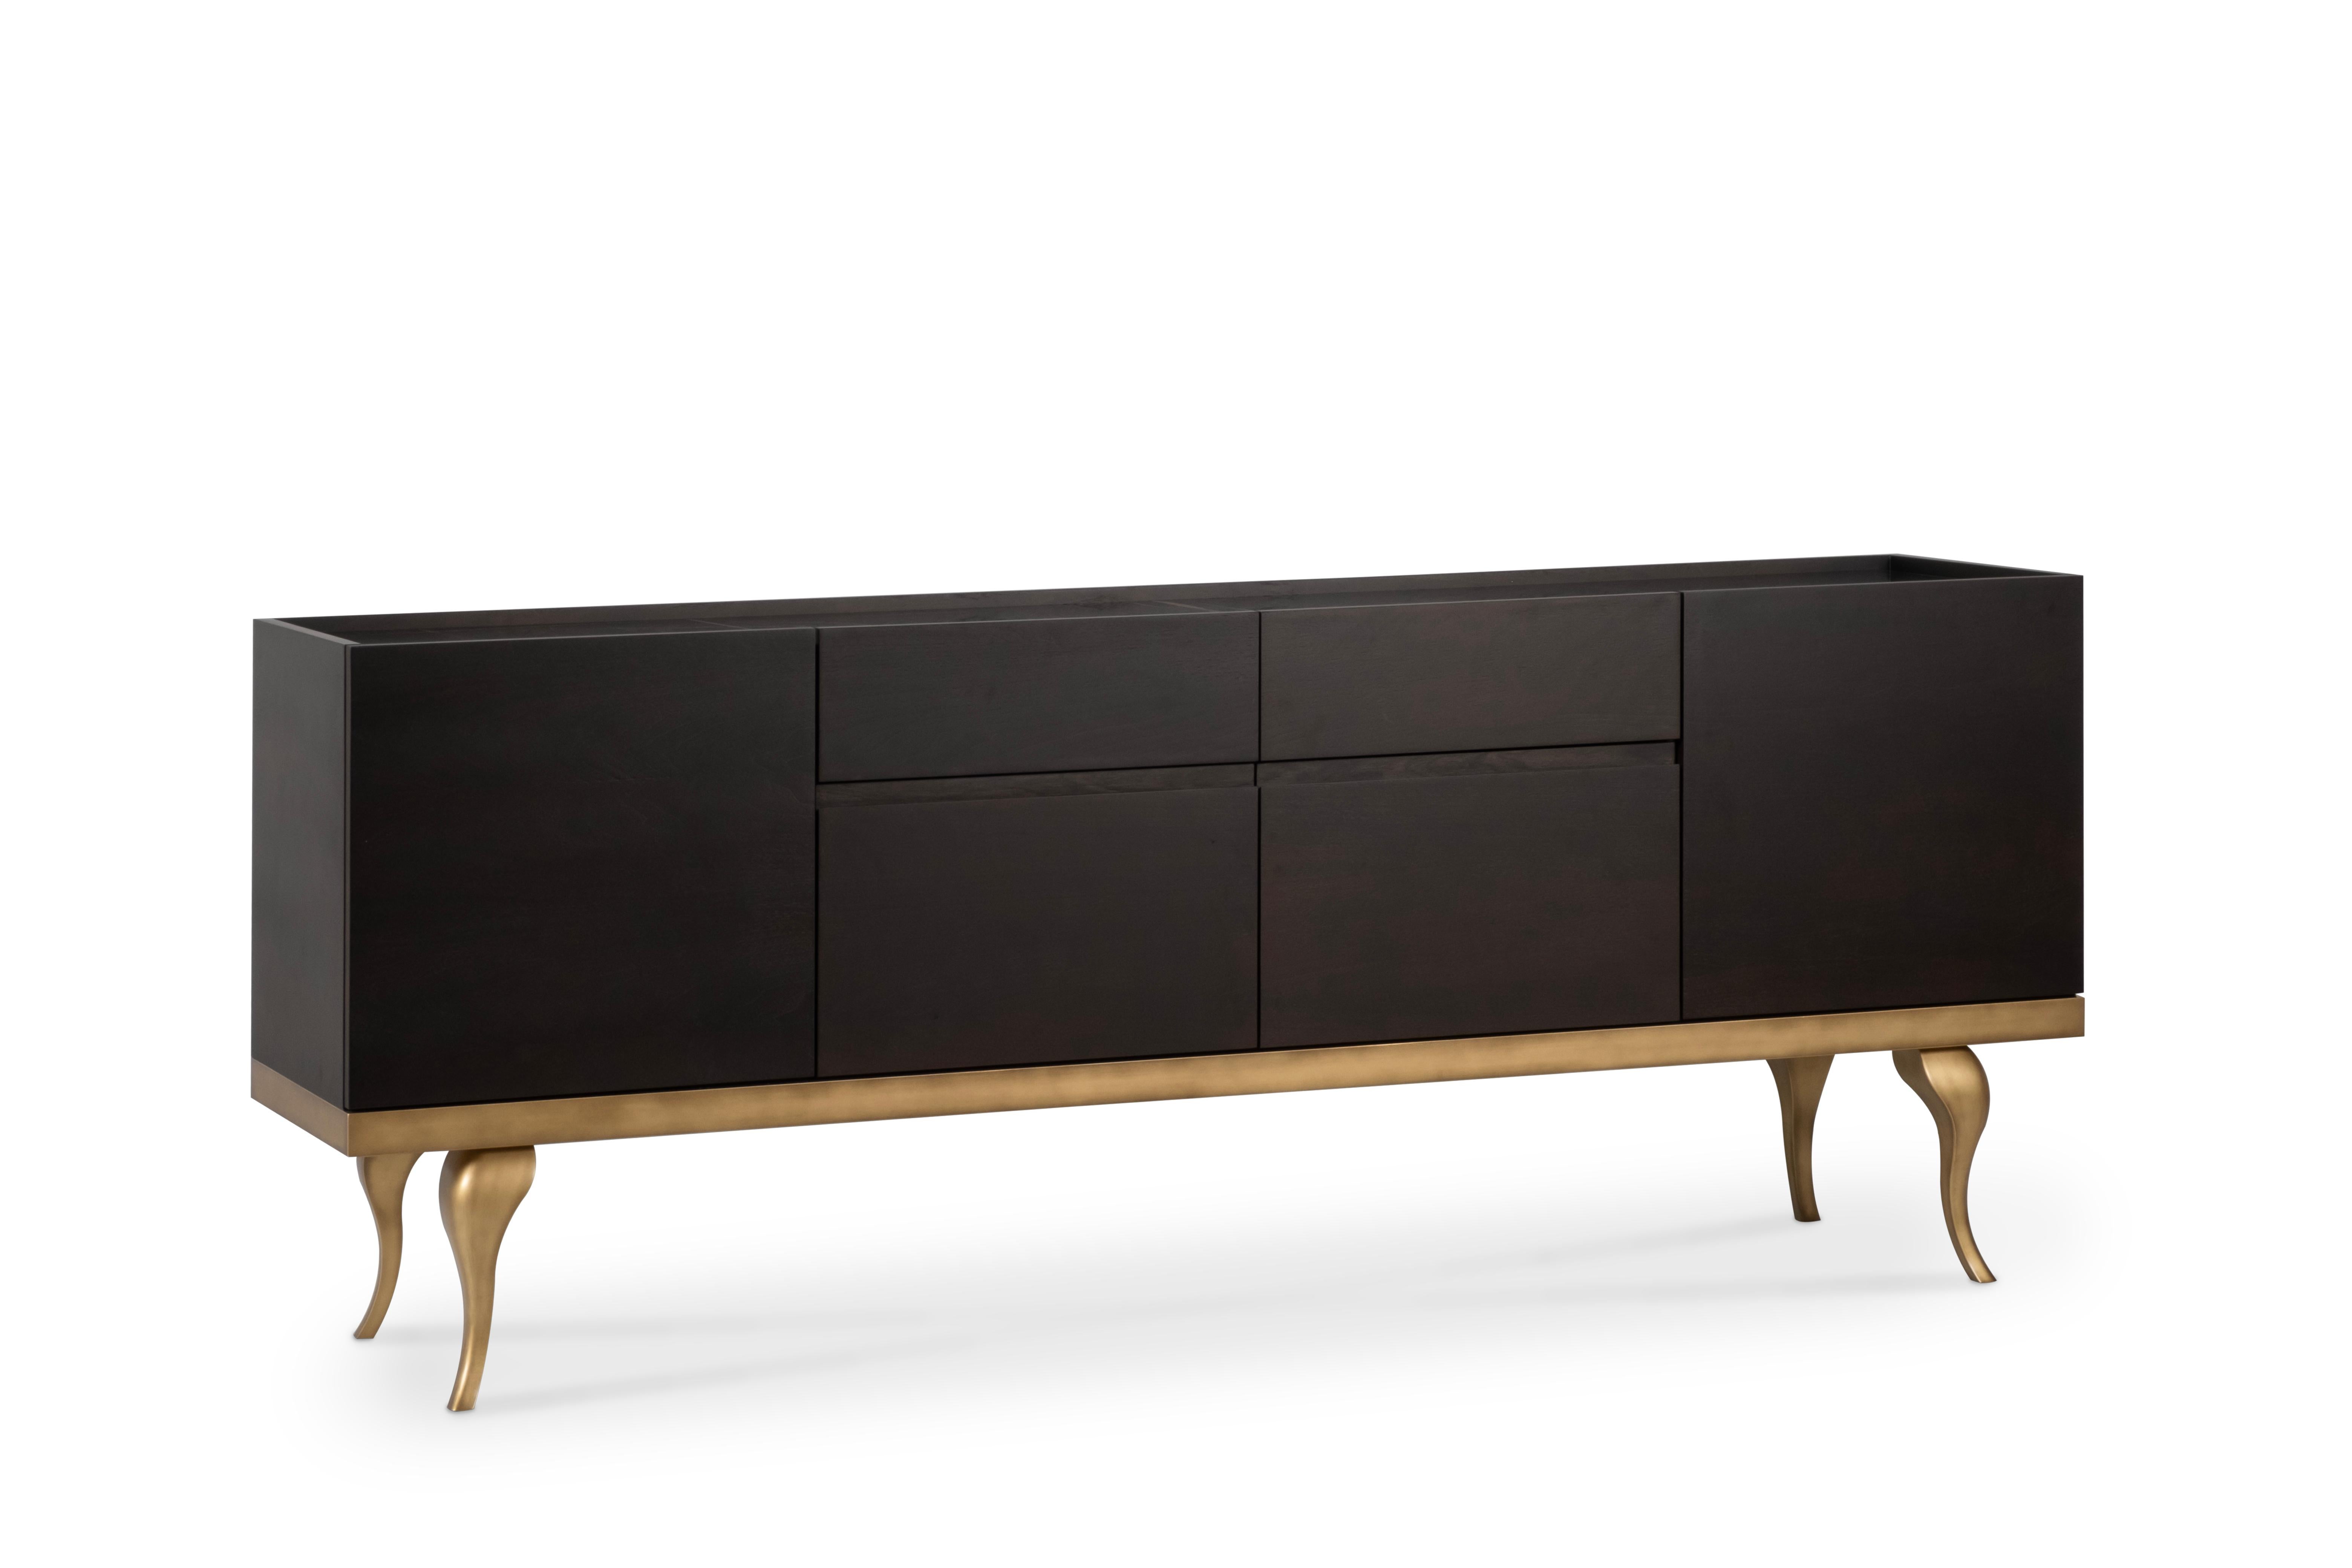 Londres Sideboard, Modern Collection, Handcrafted in Portugal - Europe by GF Modern.

Sideboard Londres is a functional and at the same time elegant solution for most environments. It has a modern shape and combines natural materials.

The exquisite